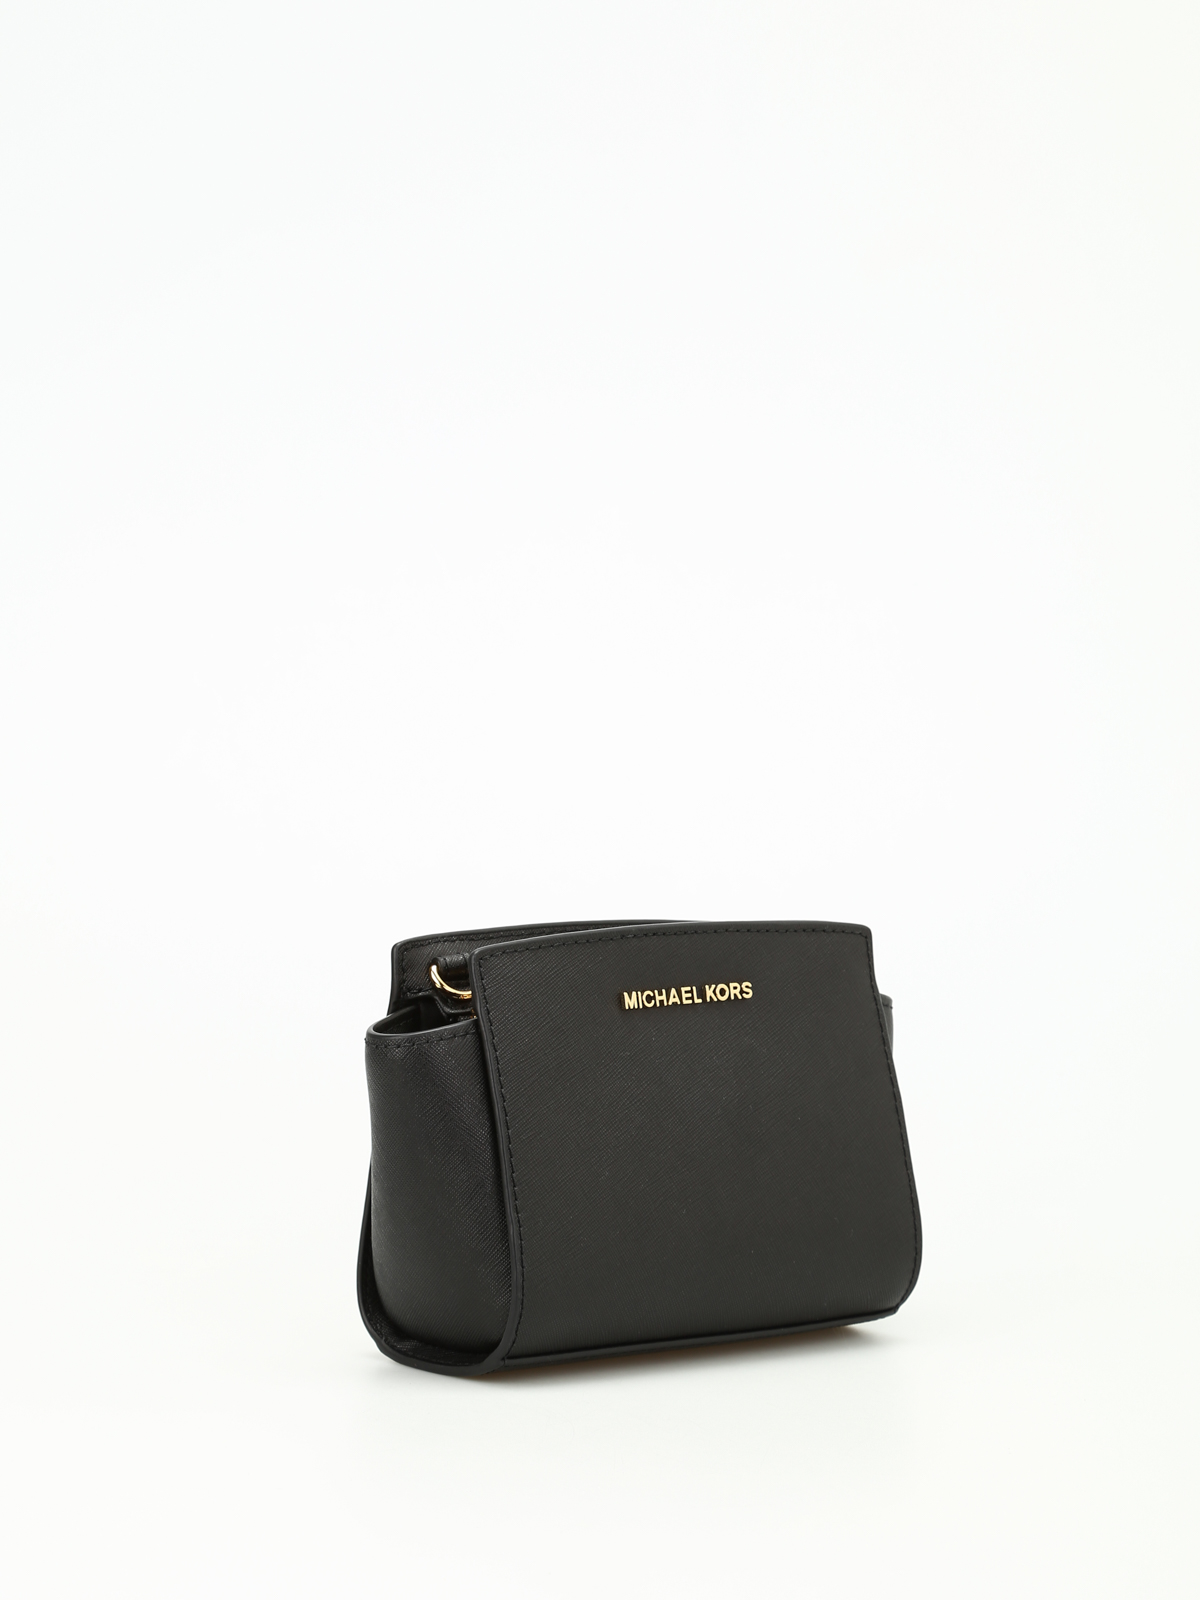 Lucie Small Pebbled Leather Crossbody Bag  Michael Kors